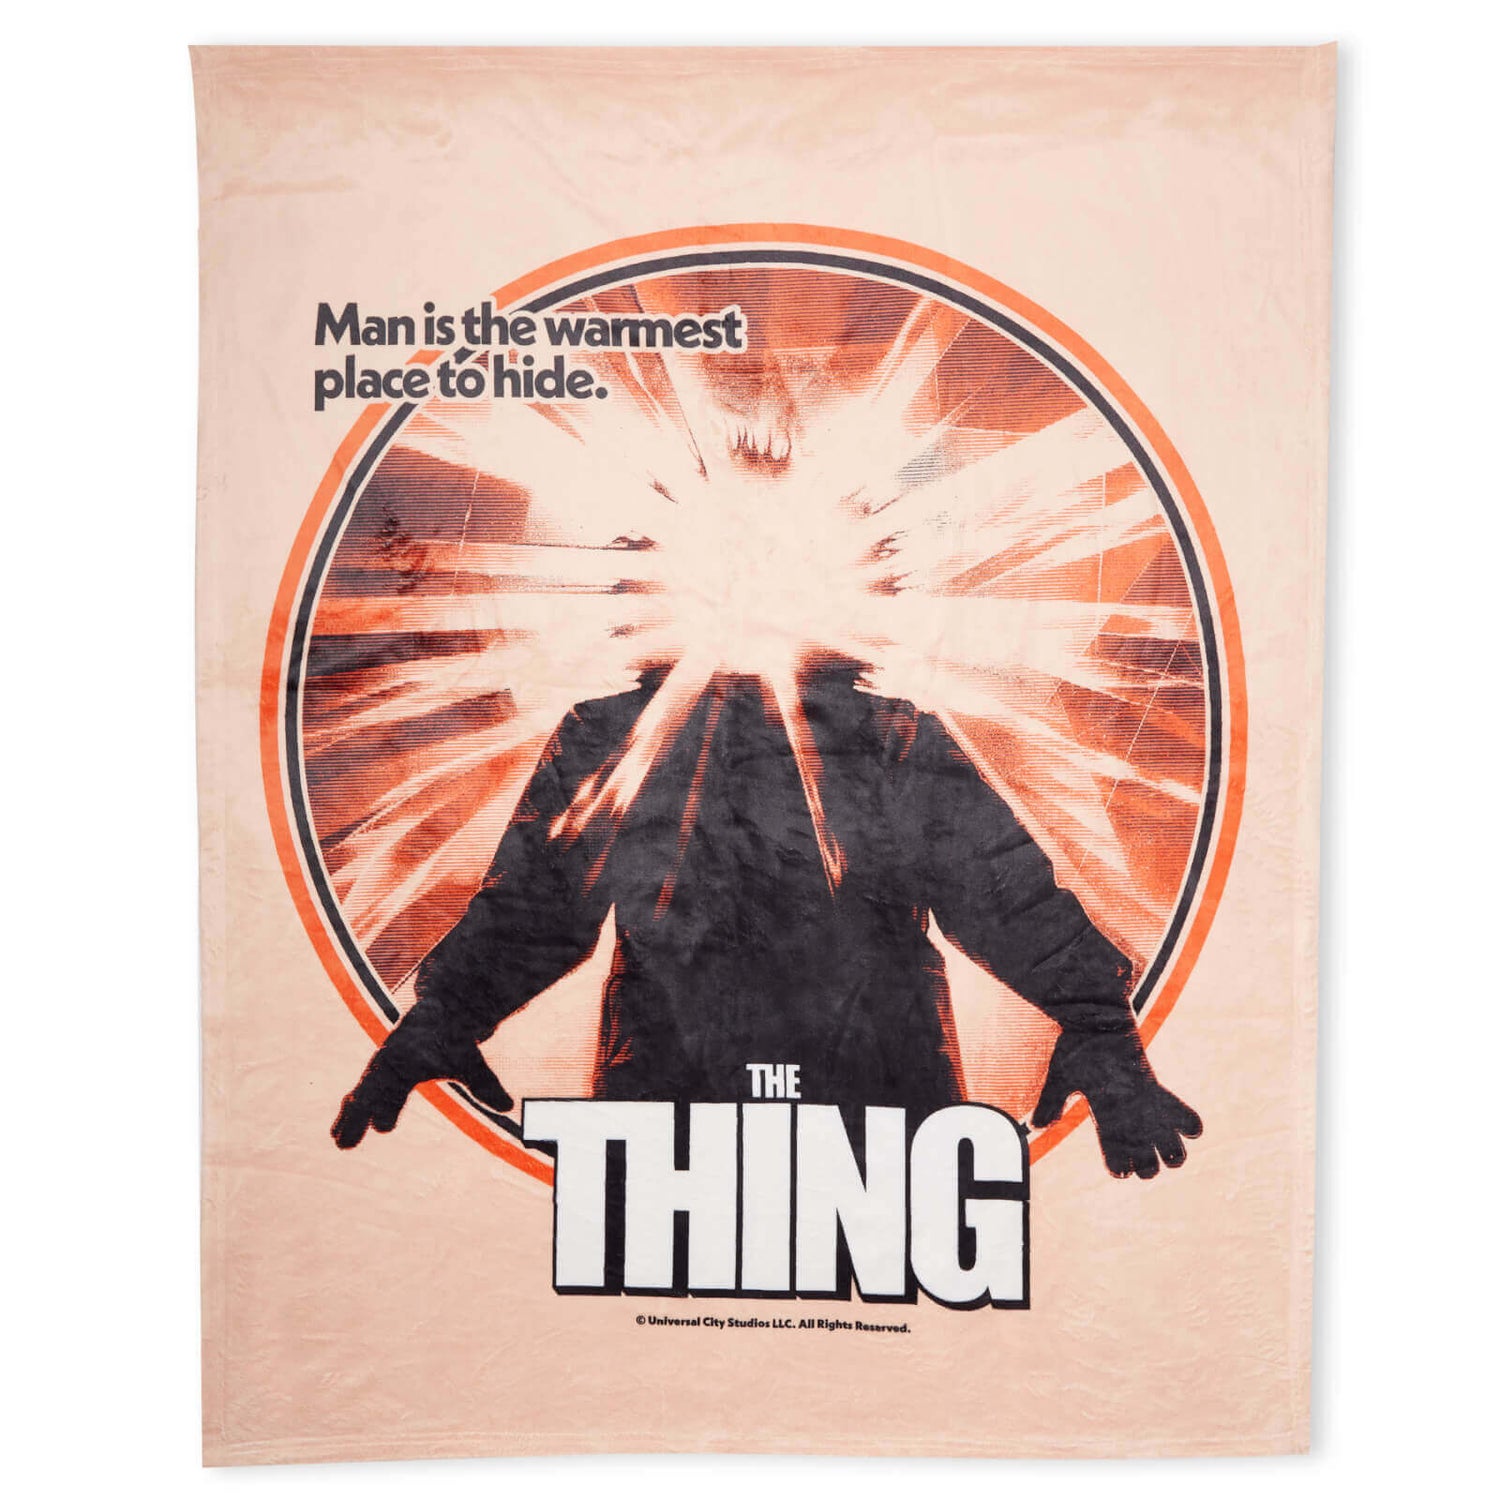 The Thing Man Is The Warmest Place To Hide Fleece Blanket - Large (150cm x 200cm)